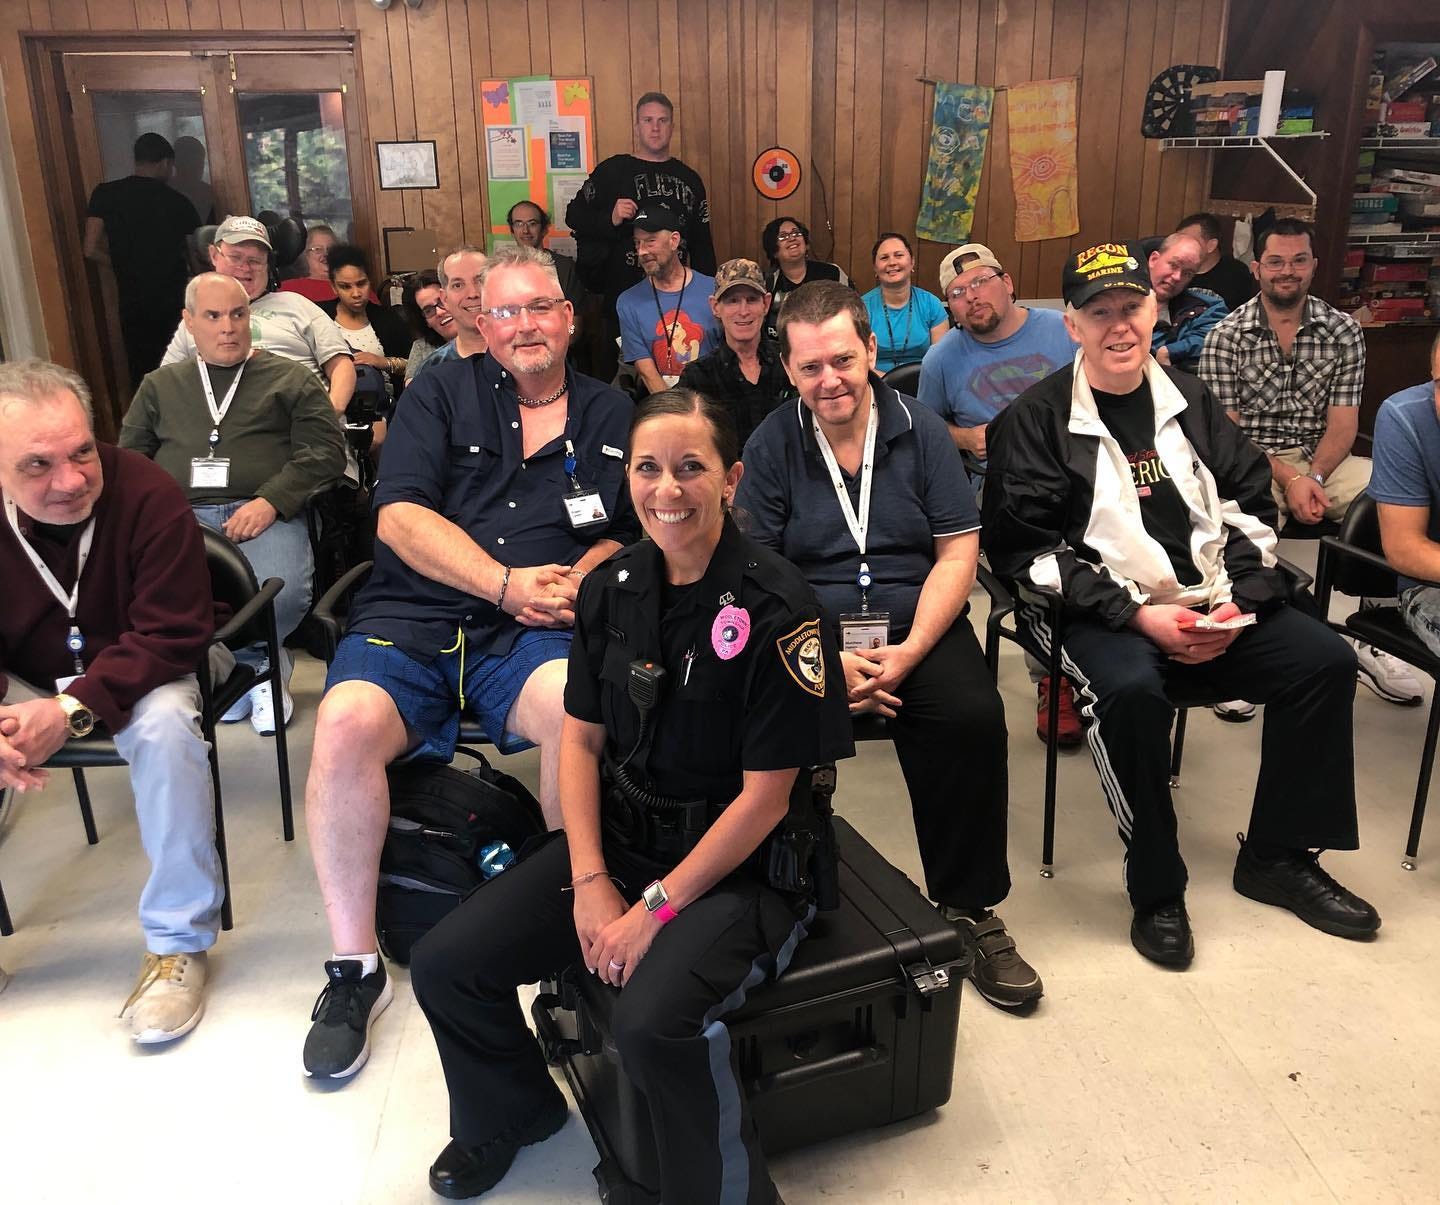 As part of its work to build a more inclusive business, Success Rehabilitation hosts community events. Last year Middletown Township (Bucks County) Police Officer Melissa Robison met with clients to discuss how to prevent confrontations between armed officers and individuals with disabilities.